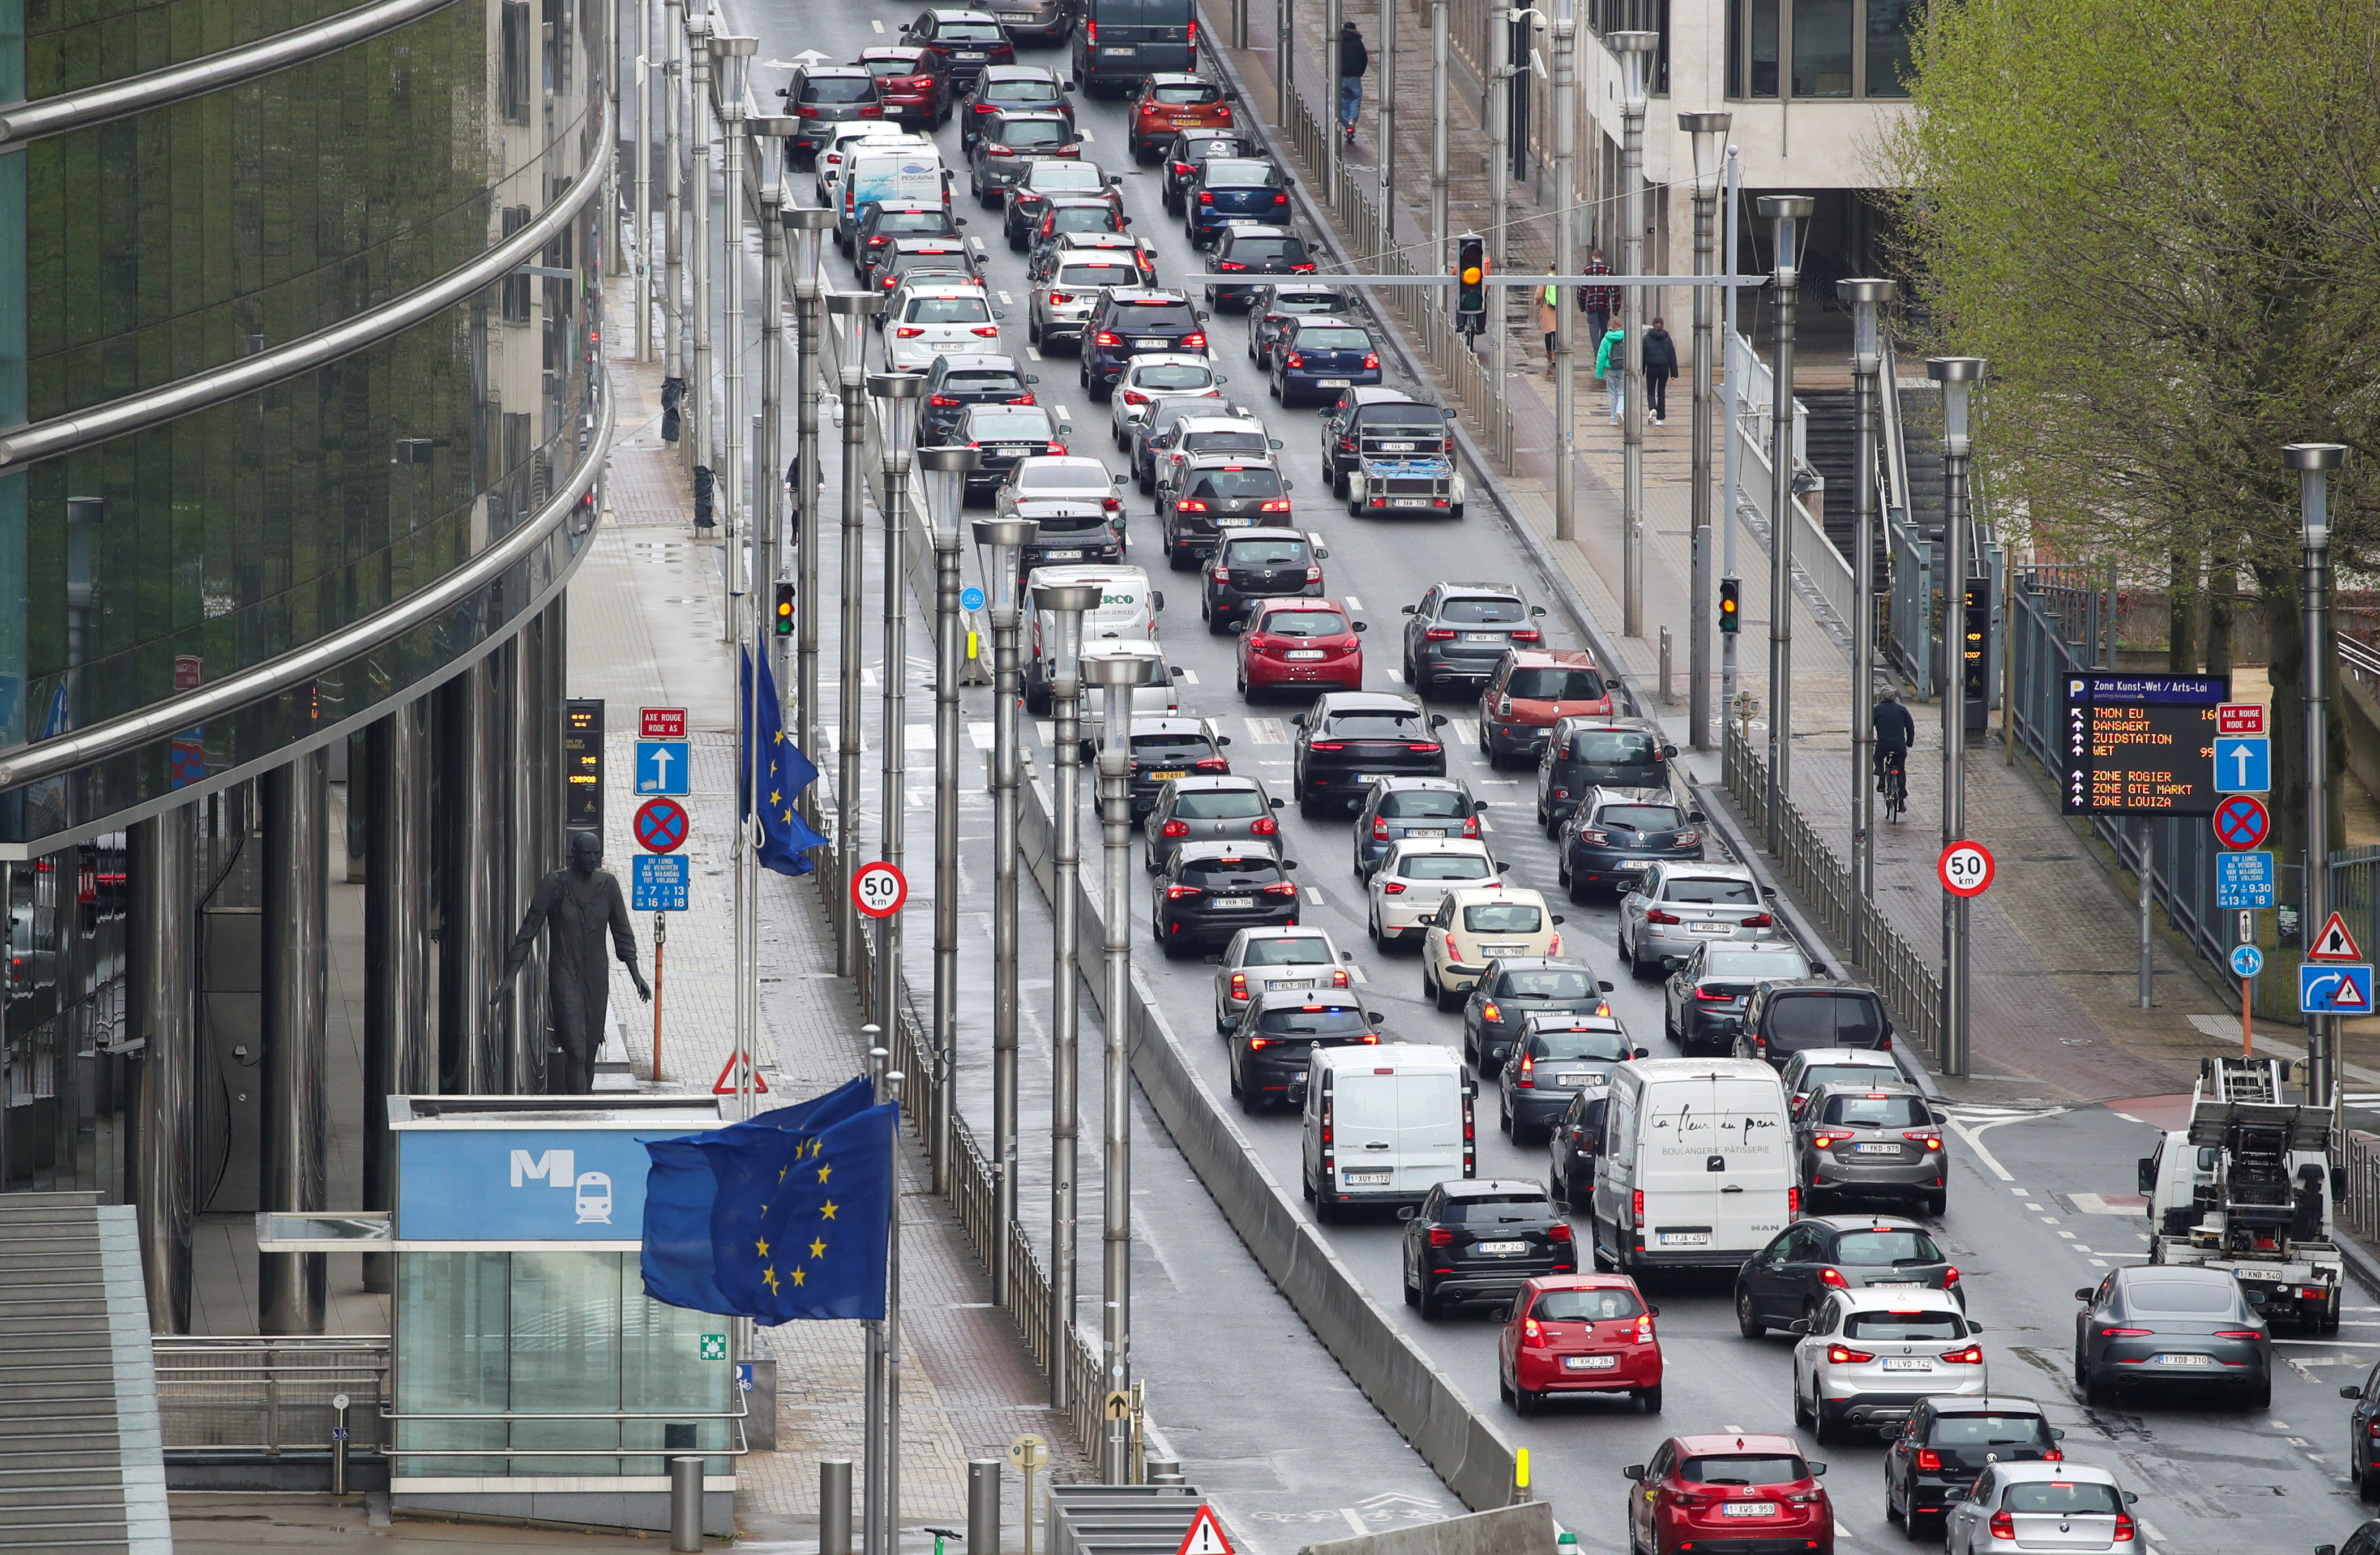 View shows cars stuck in traffic jam on a road heading towards central Brussels